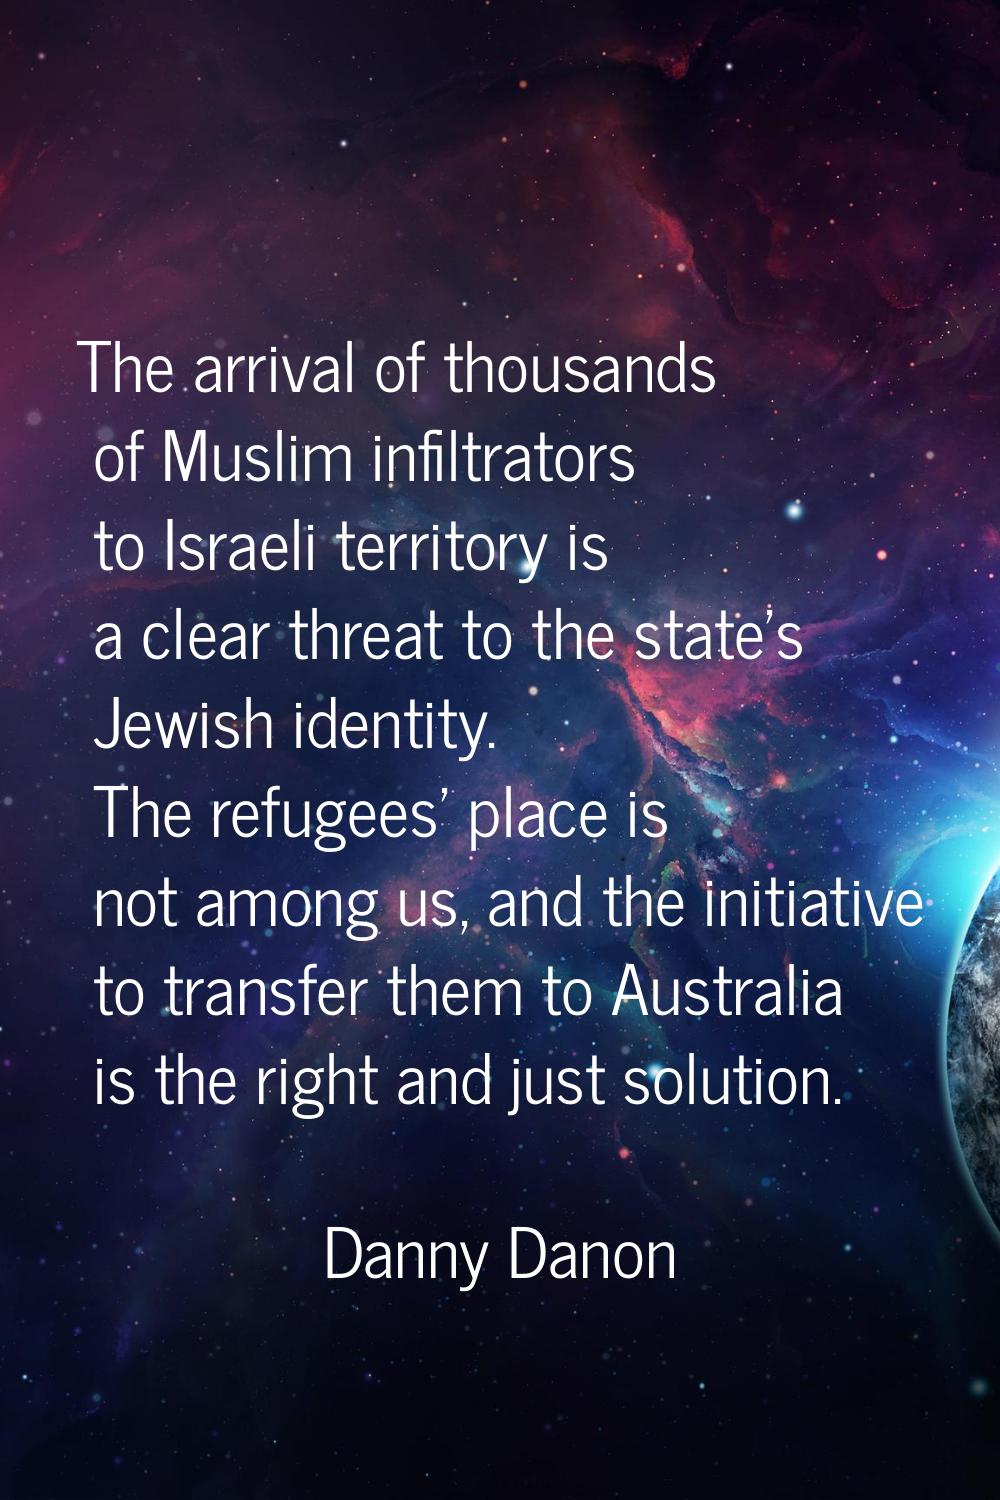 The arrival of thousands of Muslim infiltrators to Israeli territory is a clear threat to the state